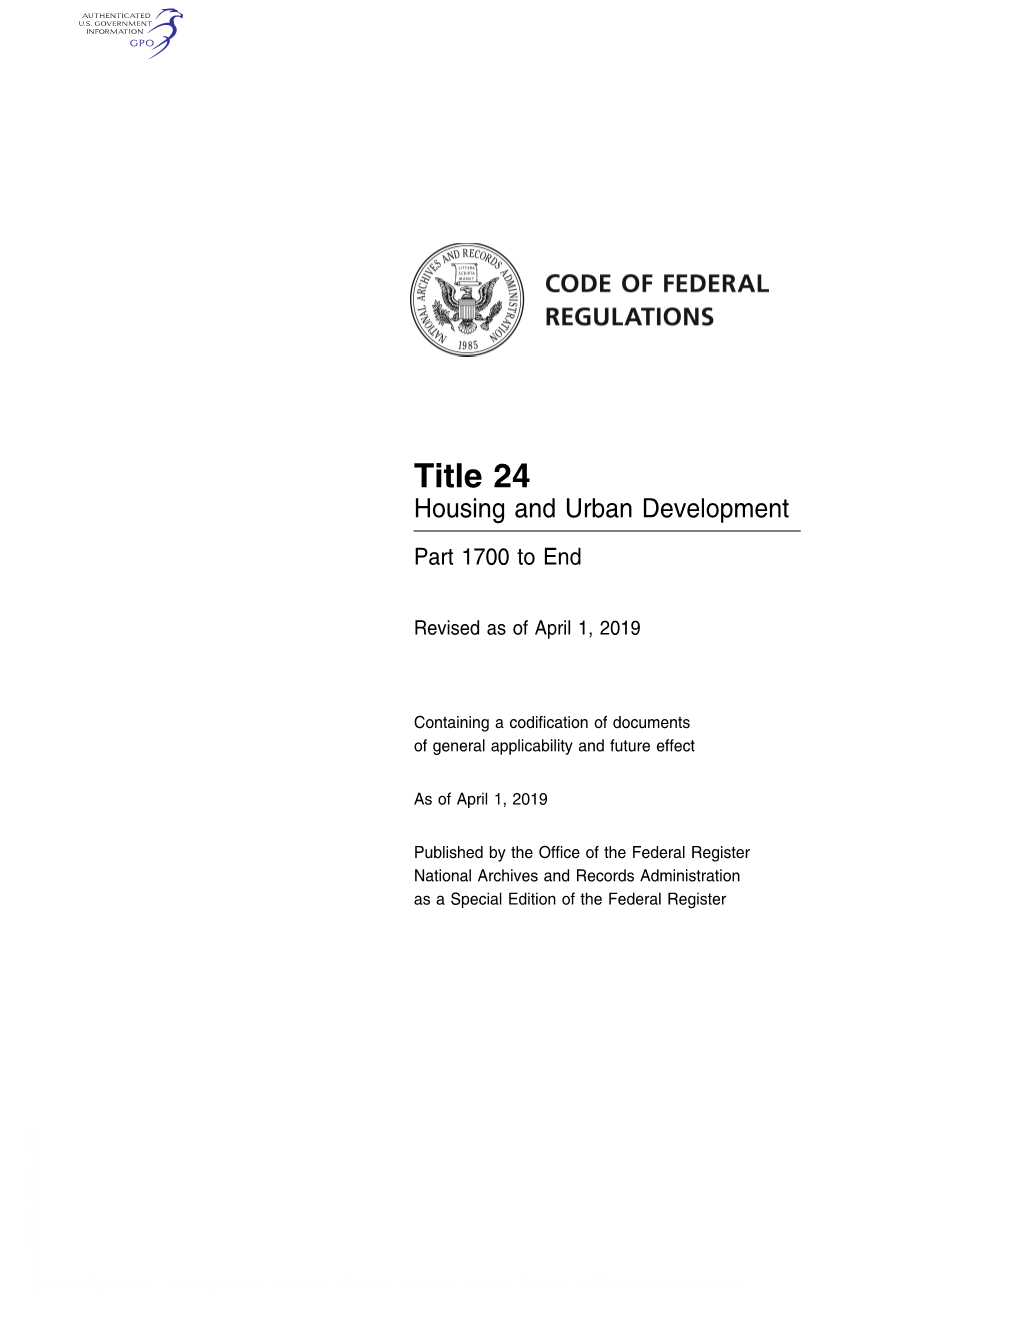 Title 24 Housing and Urban Development Part 1700 to End